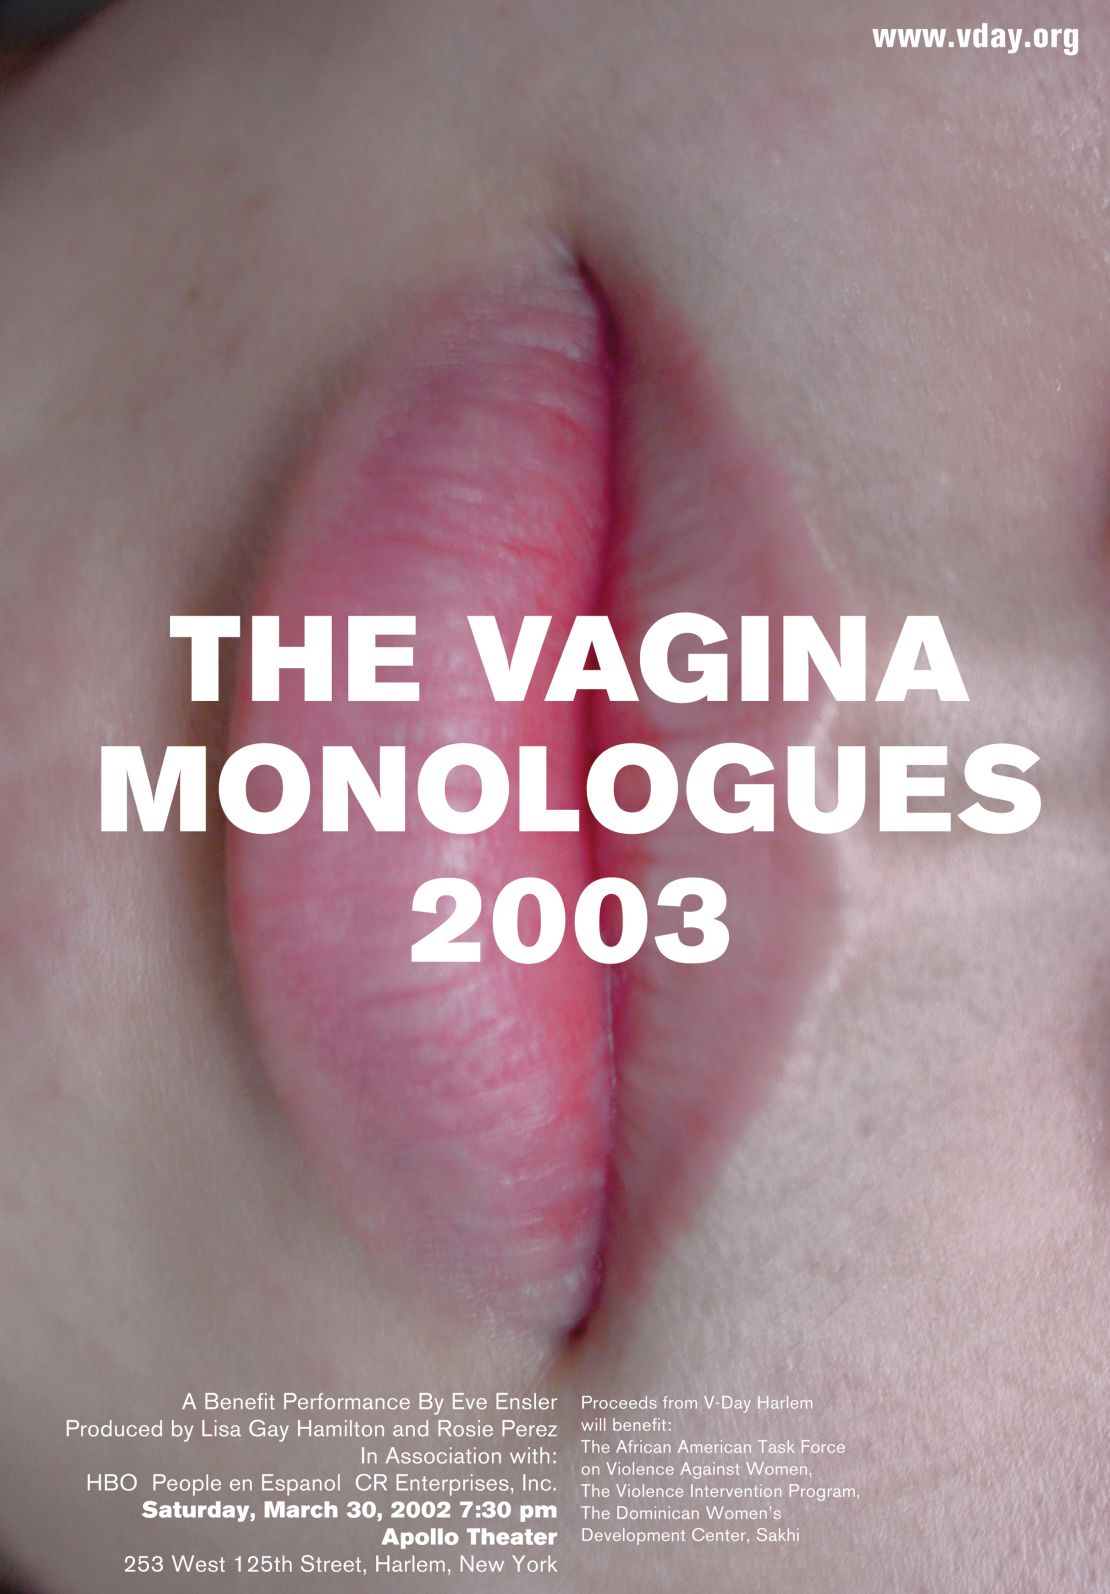 Vagina Monologues theater poster, USA, 2002.